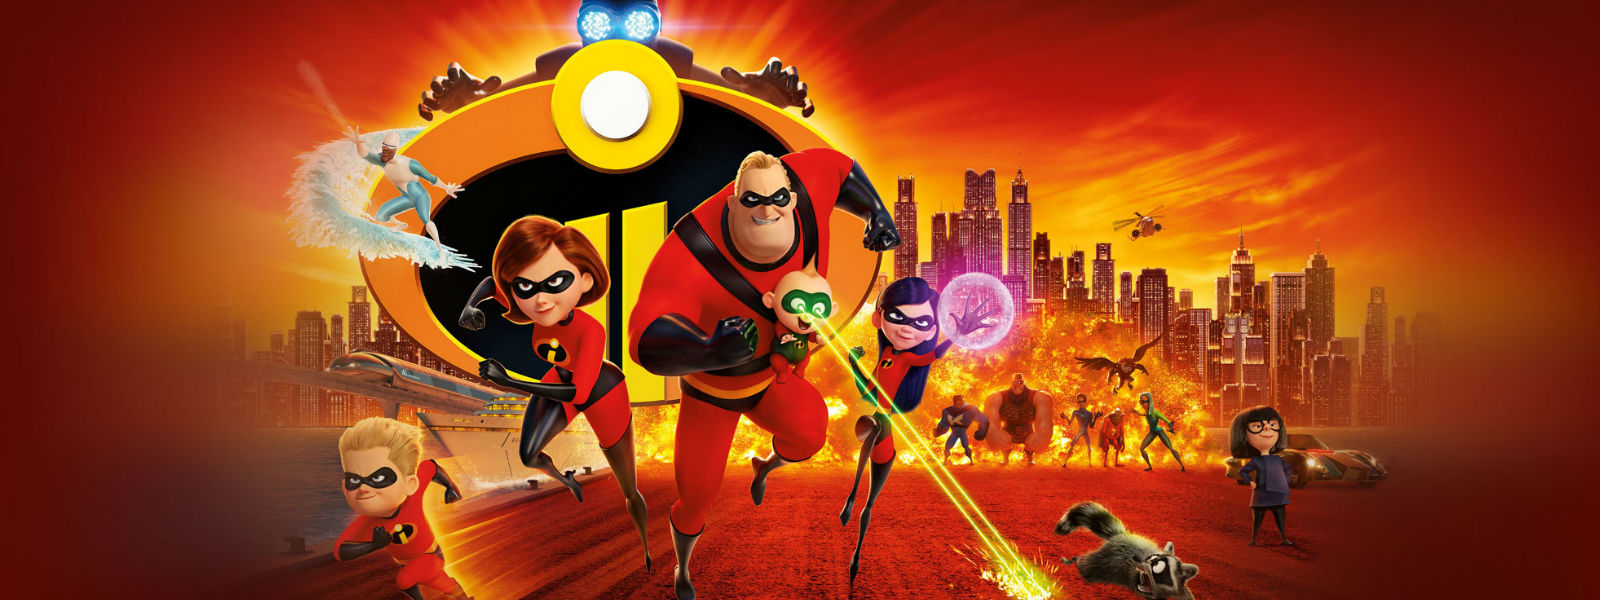 "Incredibles 2" smashes opening weekend records